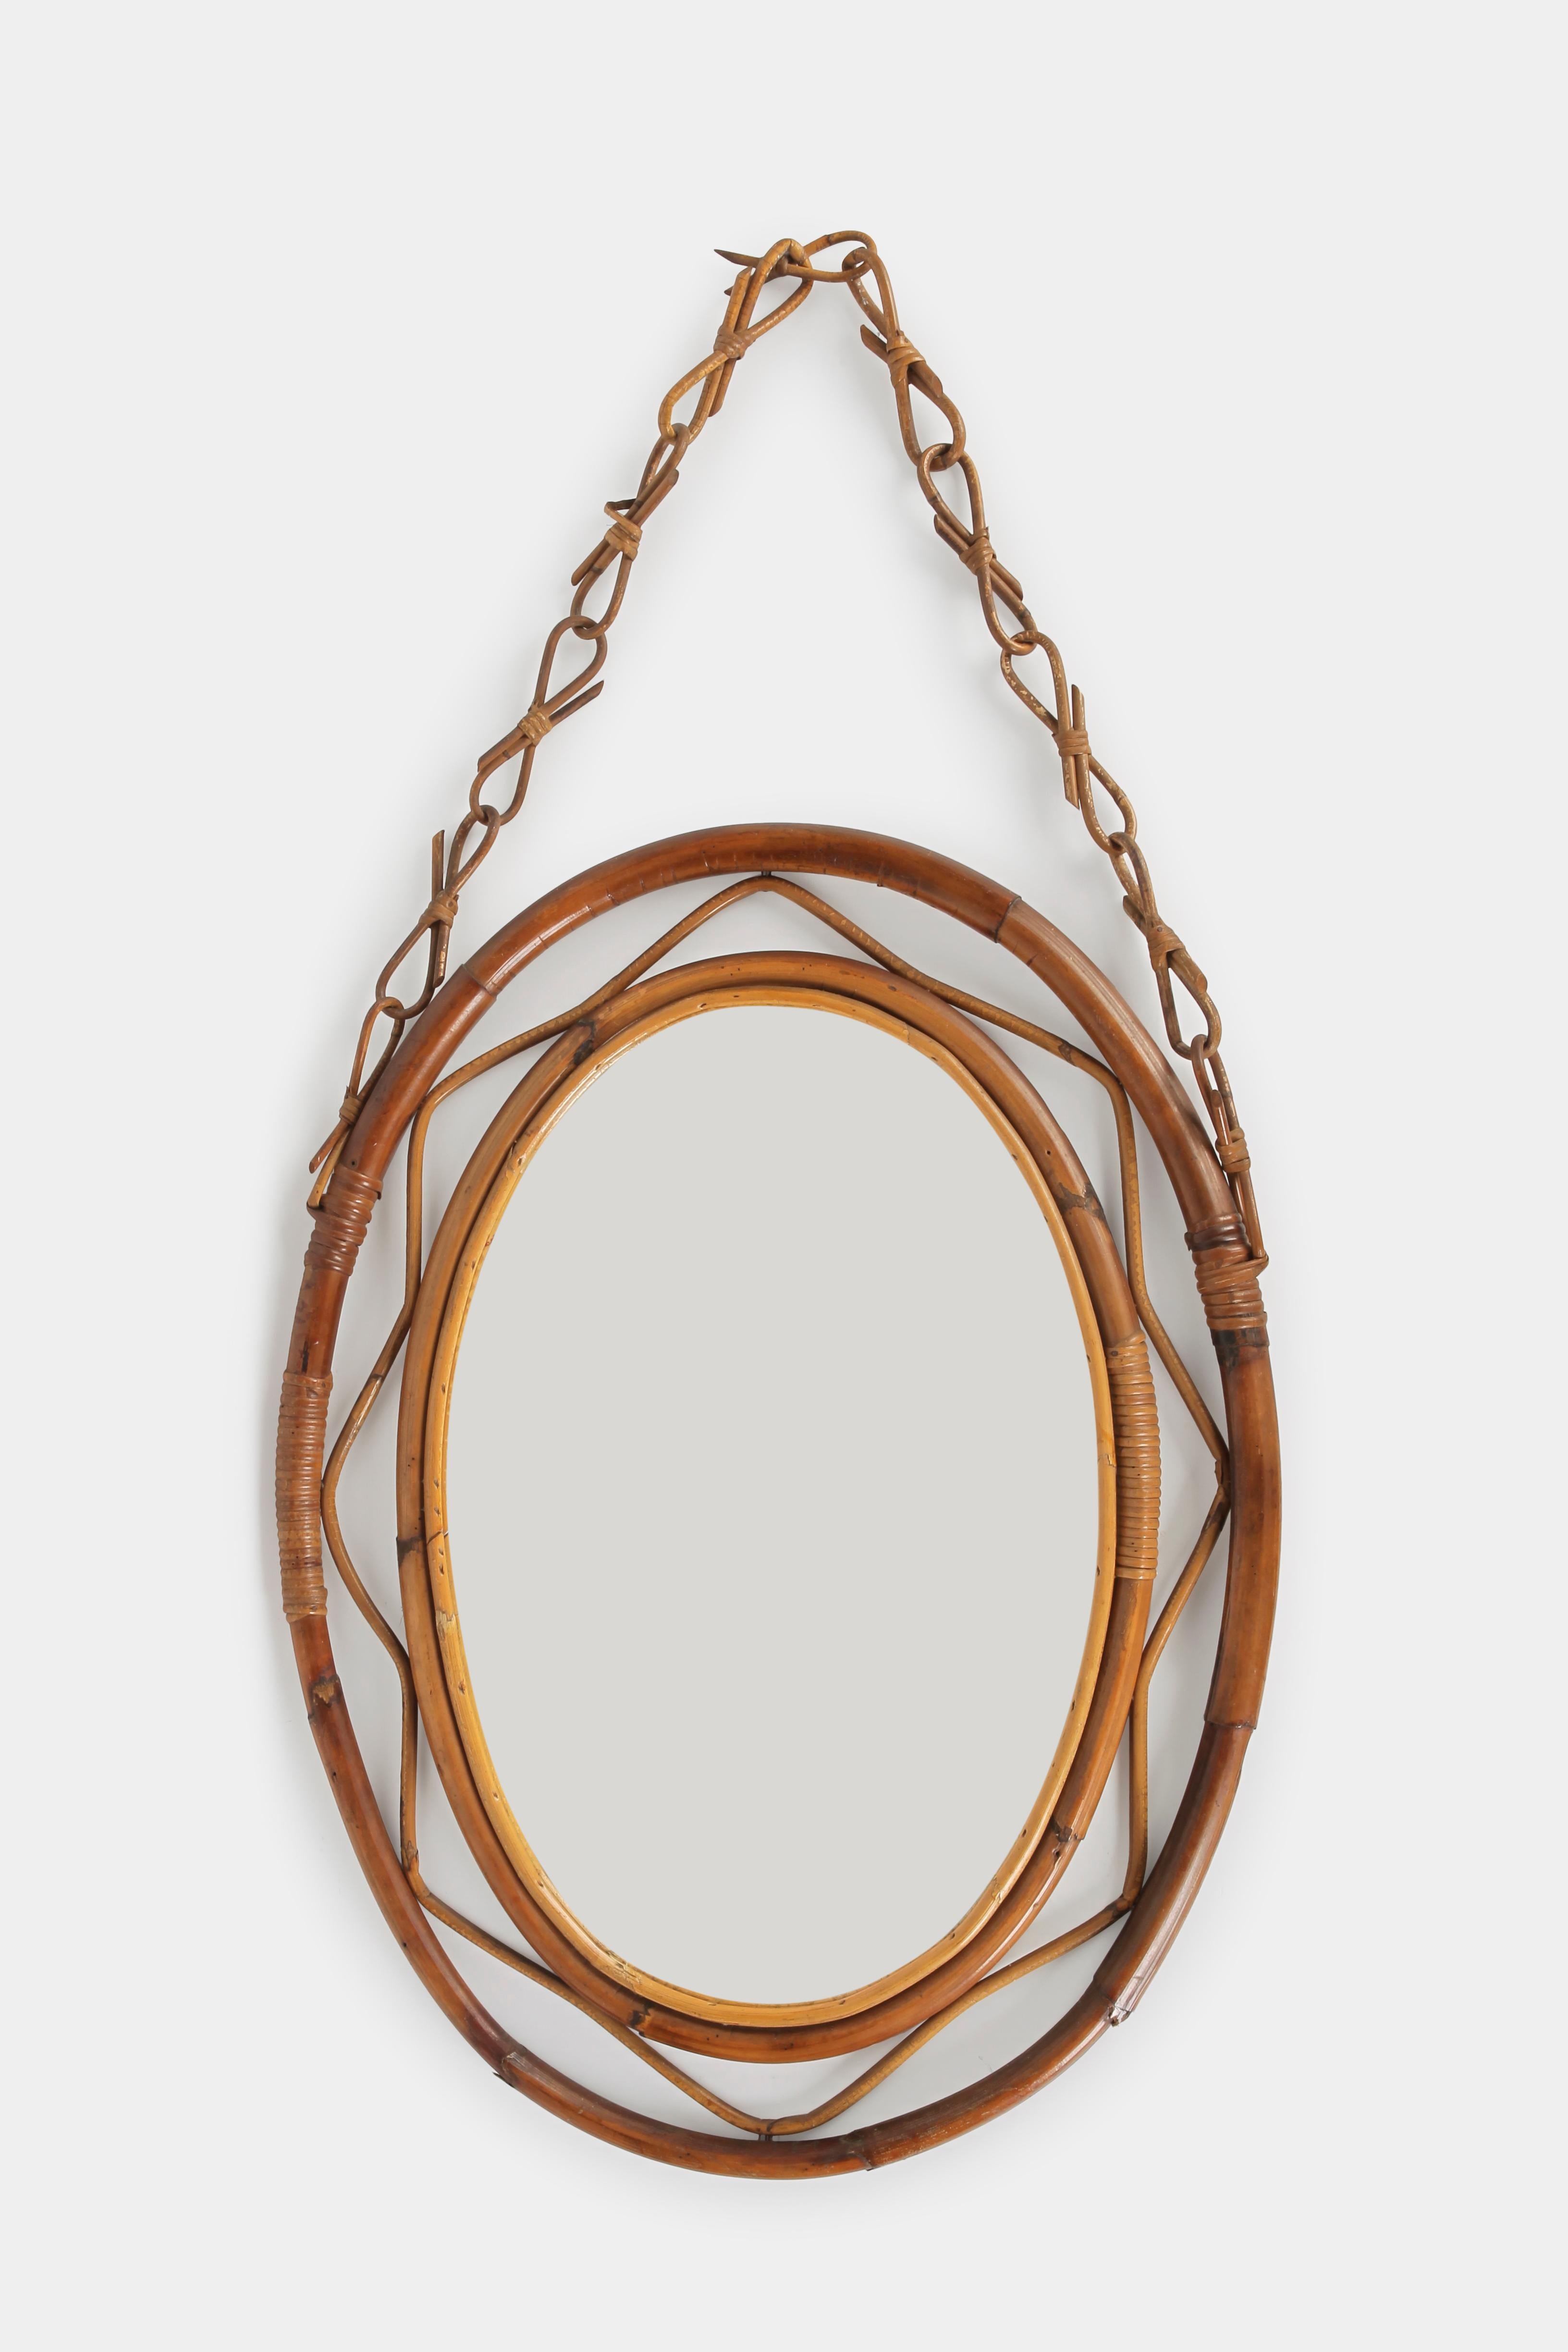 Gorgeous oval bamboo cane mirror from the 1960s with a bamboo chain for hanging. Made by the company Bonacina in Italy. In very good condition. A great piece for any room.